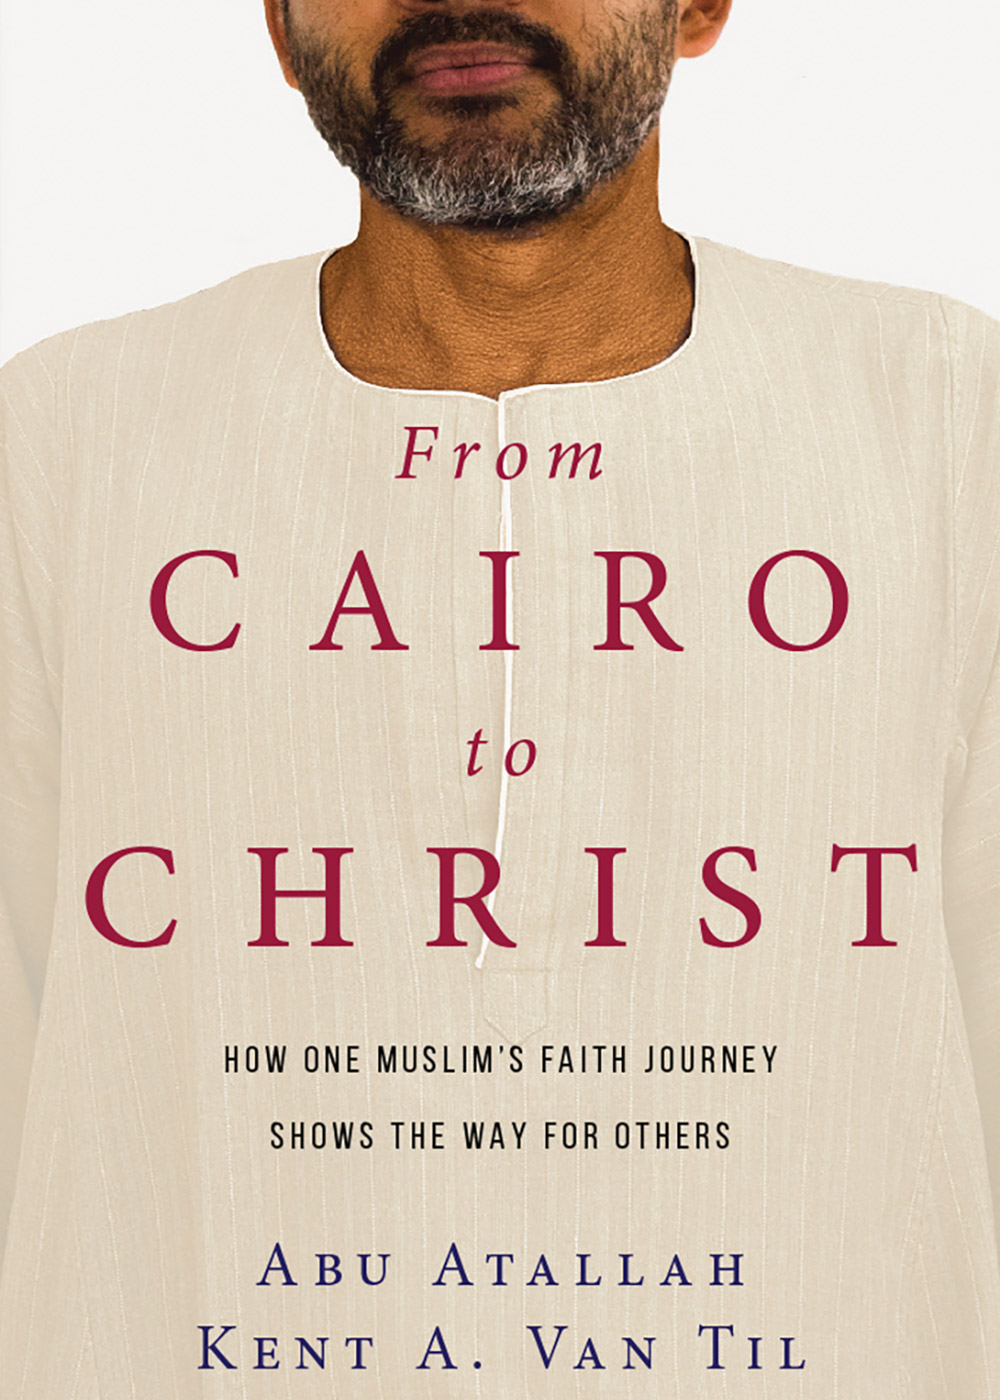 From-Cairo-to-Christ-1000x1400